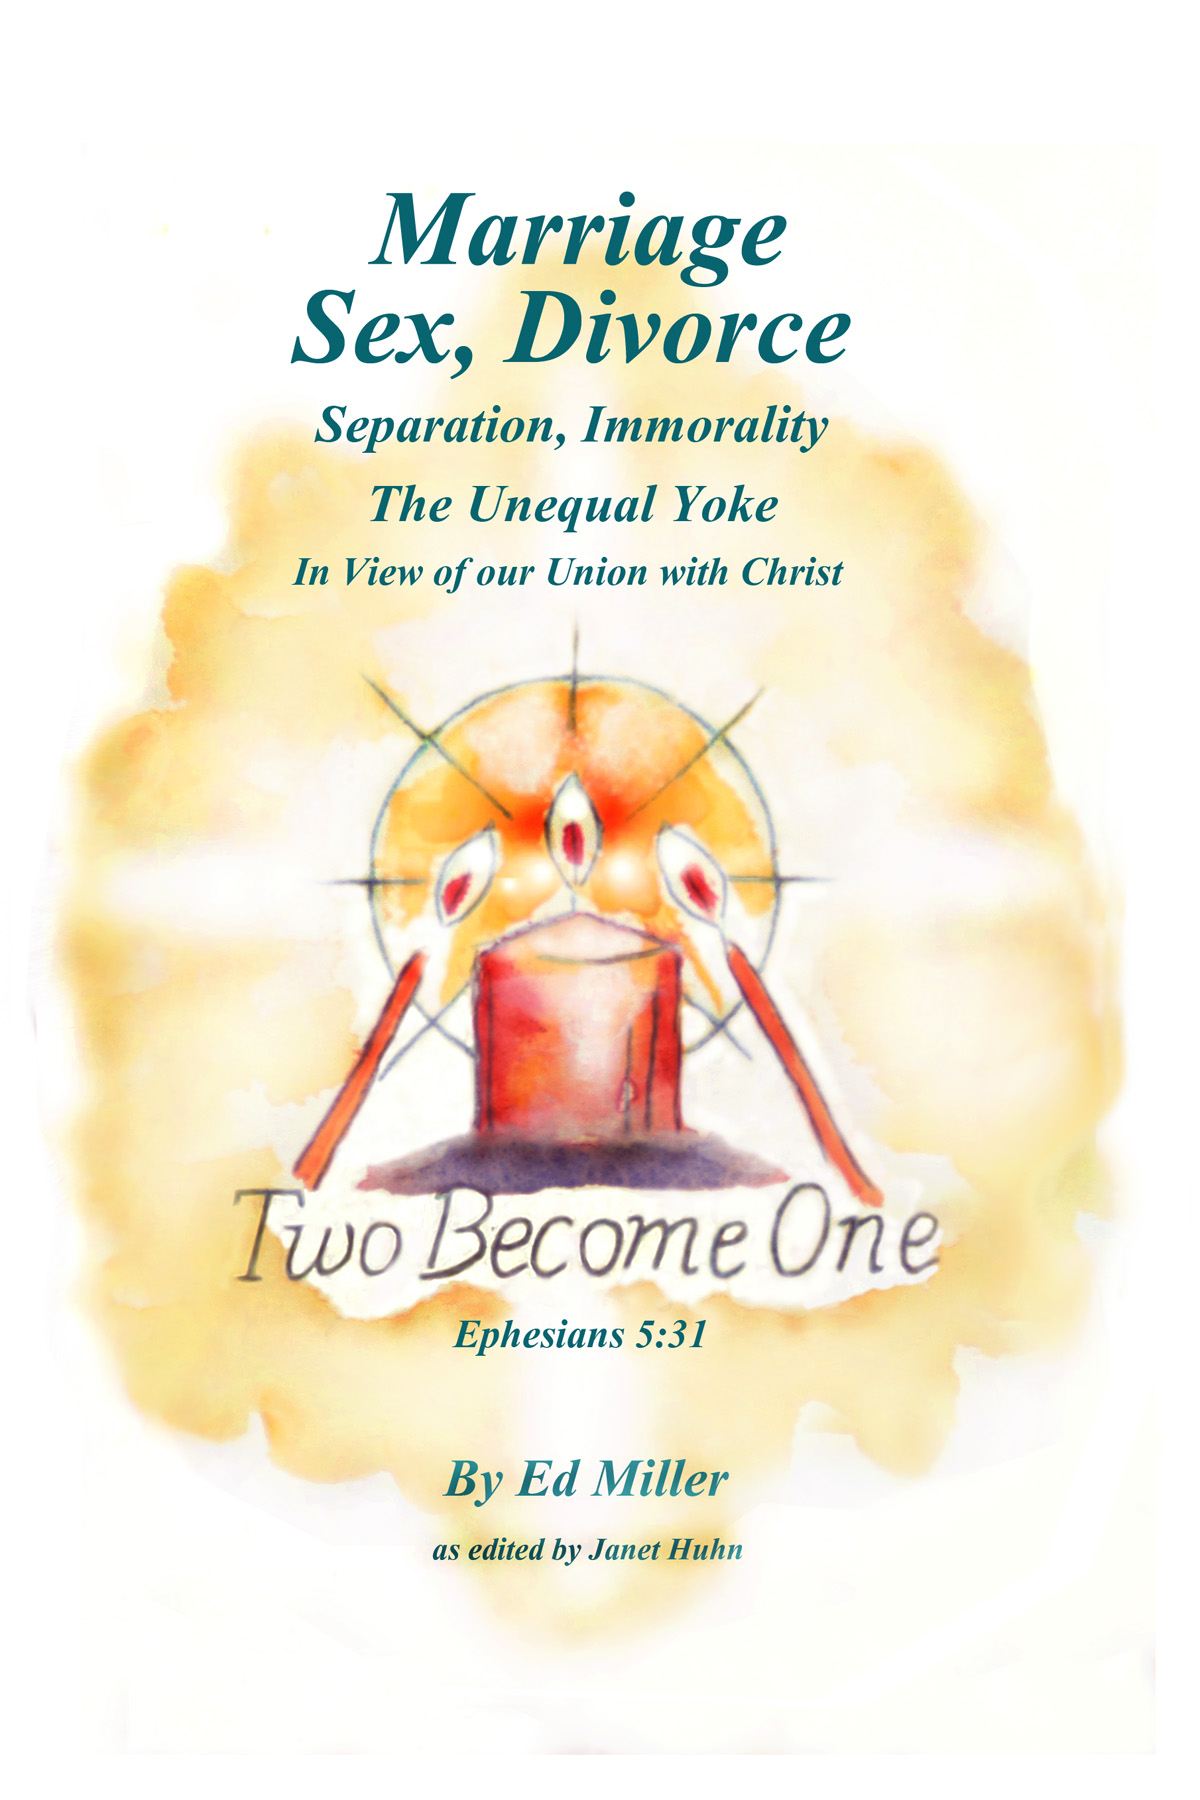 Marriage, Sex, Divorce, Separation, The Unequal Yoke, Immorality Ed Miller 